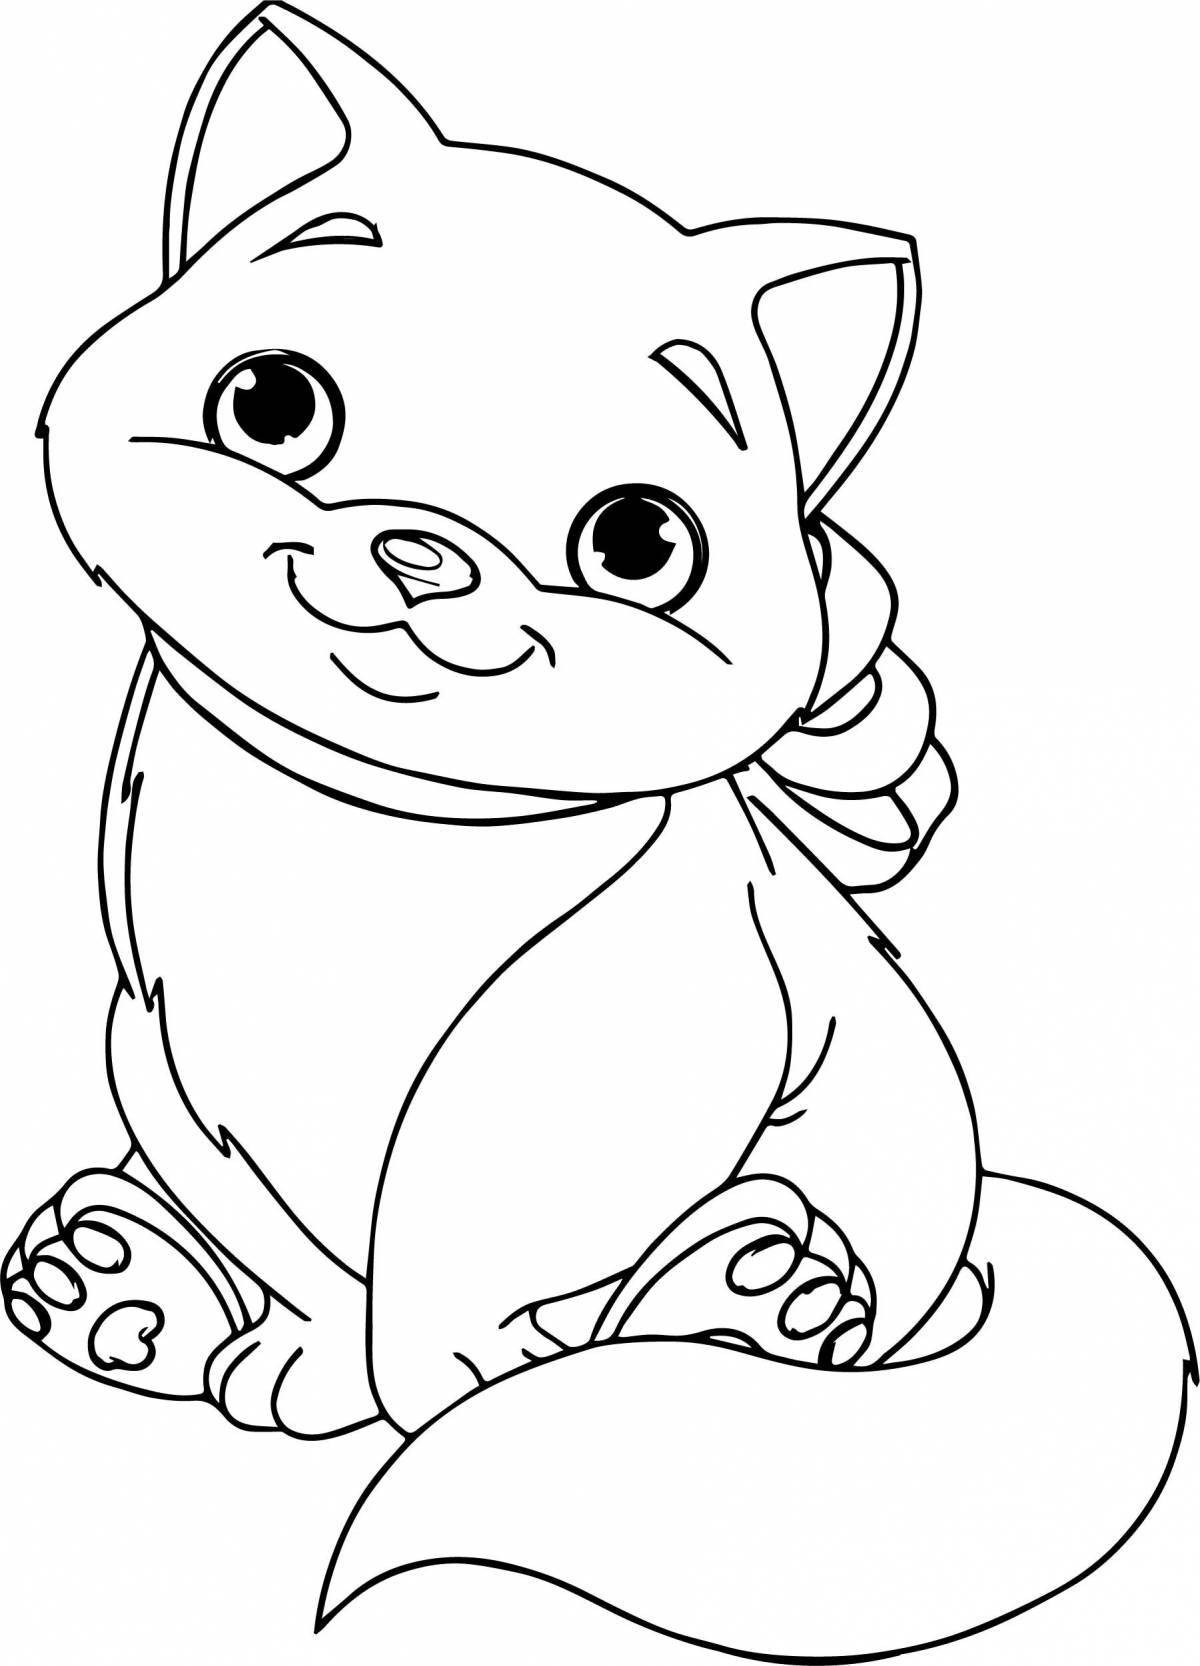 Colouring happy kittens